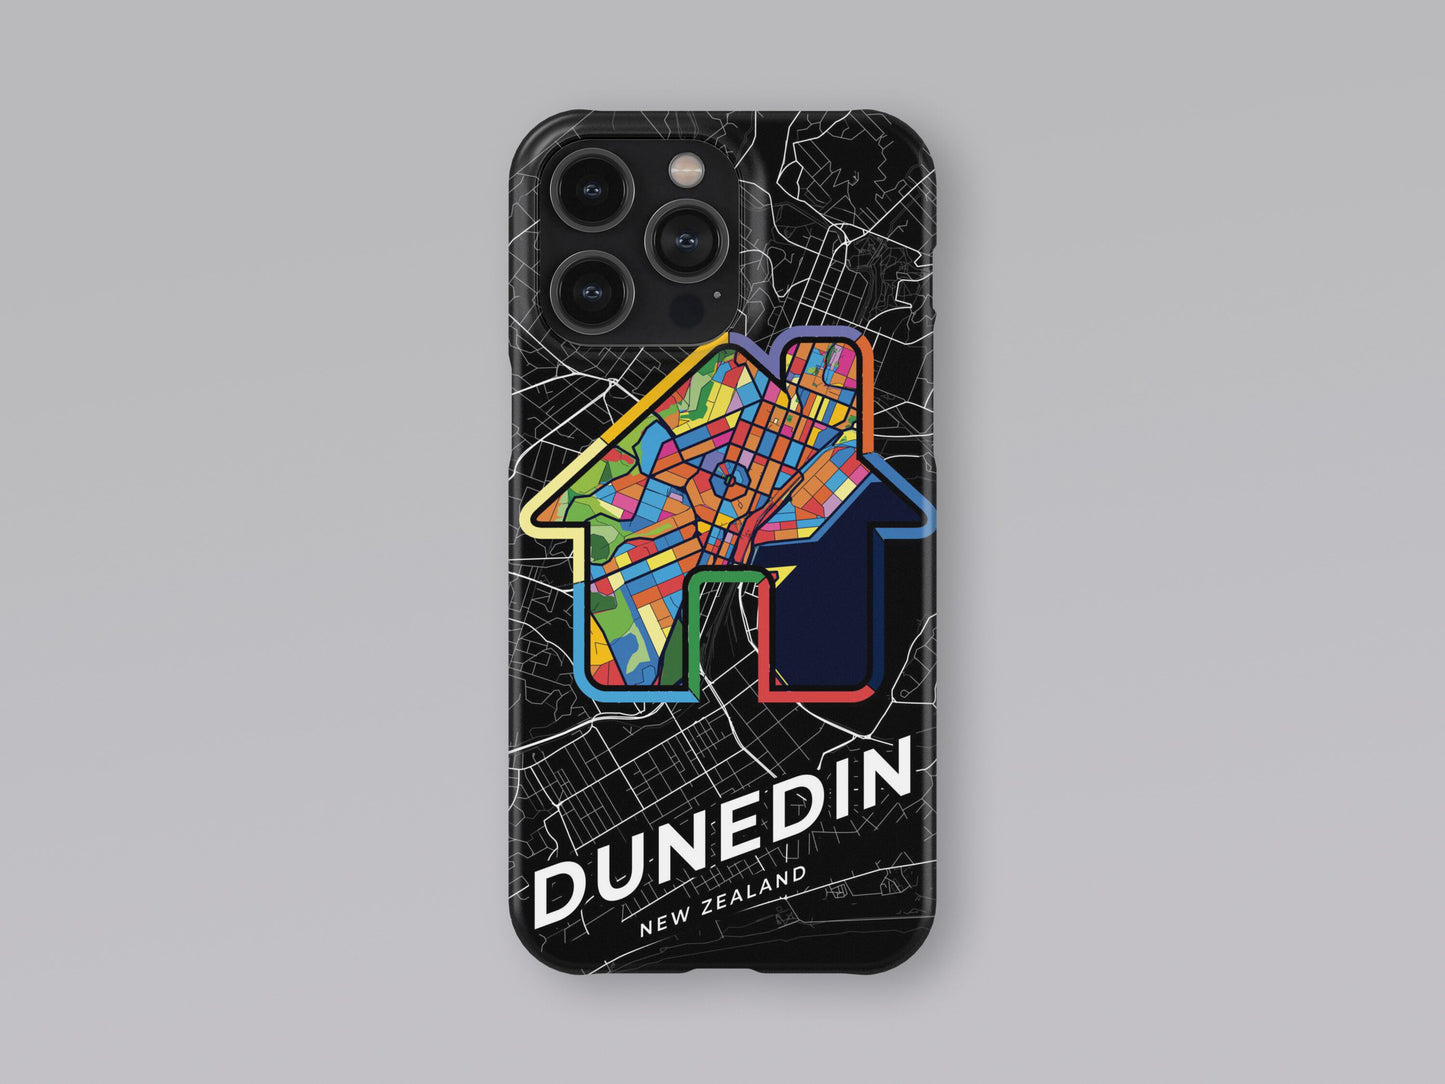 Dunedin New Zealand slim phone case with colorful icon. Birthday, wedding or housewarming gift. Couple match cases. 3